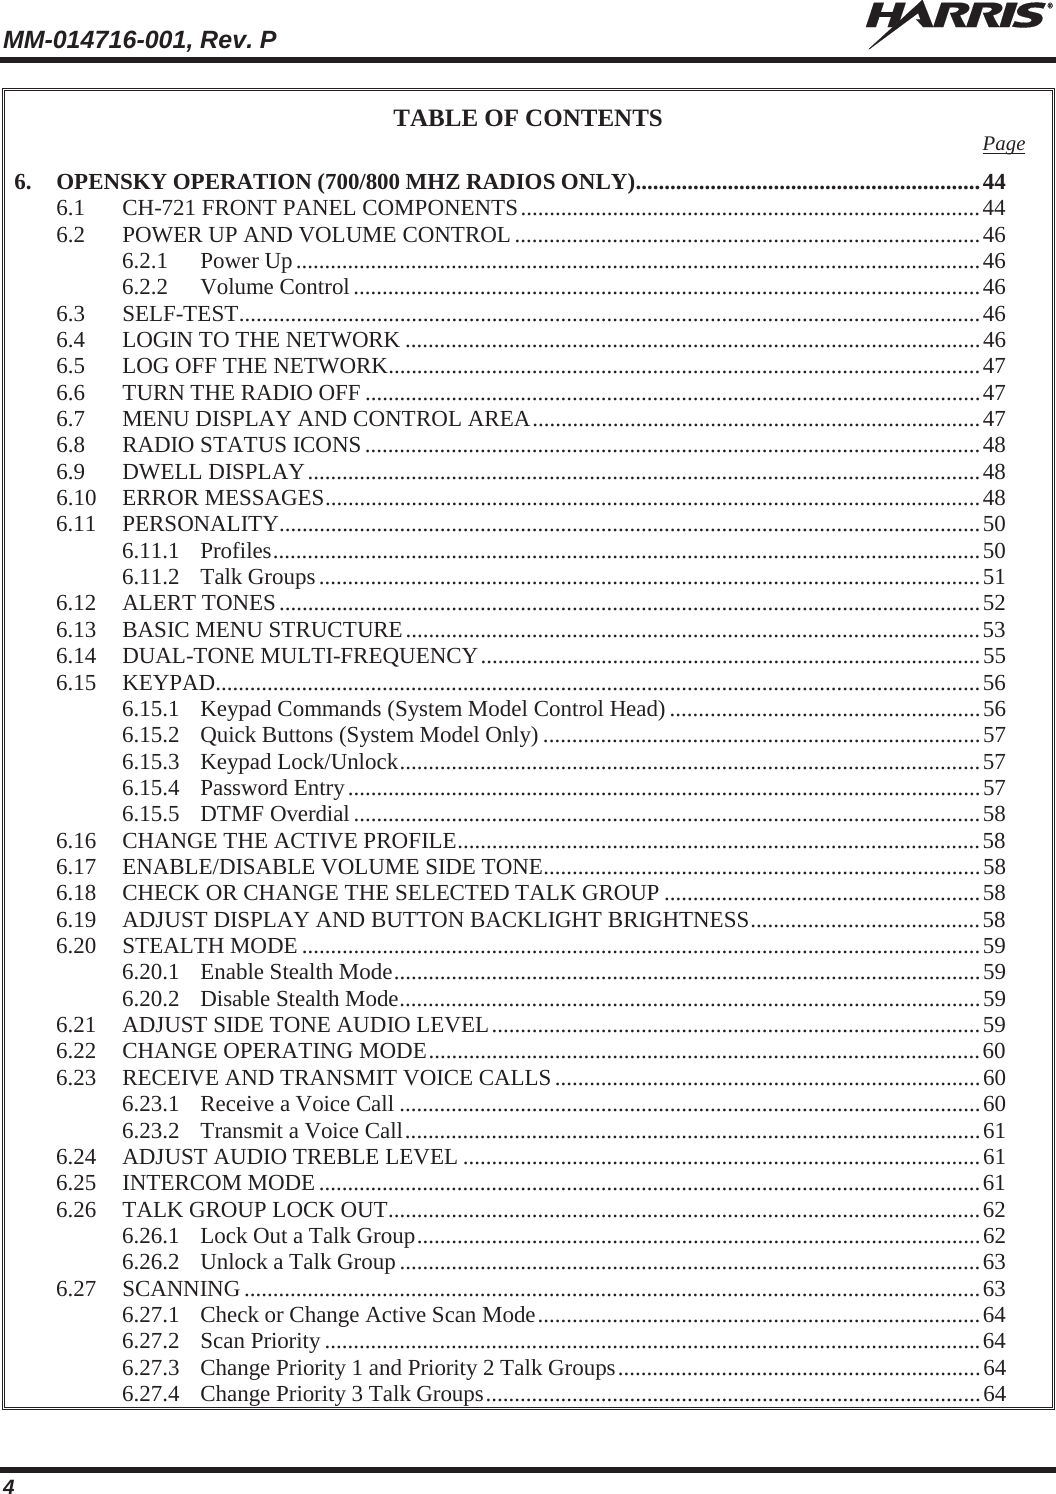 MM-014716-001, Rev. P  4 TABLE OF CONTENTS Page 6. OPENSKY OPERATION (700/800 MHZ RADIOS ONLY) ............................................................ 44 6.1 CH-721 FRONT PANEL COMPONENTS ................................................................................ 44 6.2 POWER UP AND VOLUME CONTROL ................................................................................. 46 6.2.1 Power Up ....................................................................................................................... 46 6.2.2 Volume Control ............................................................................................................. 46 6.3 SELF-TEST ................................................................................................................................. 46 6.4 LOGIN TO THE NETWORK .................................................................................................... 46 6.5 LOG OFF THE NETWORK ....................................................................................................... 47 6.6 TURN THE RADIO OFF ........................................................................................................... 47 6.7 MENU DISPLAY AND CONTROL AREA .............................................................................. 47 6.8 RADIO STATUS ICONS ........................................................................................................... 48 6.9 DWELL DISPLAY ..................................................................................................................... 48 6.10 ERROR MESSAGES .................................................................................................................. 48 6.11 PERSONALITY.......................................................................................................................... 50 6.11.1 Profiles ........................................................................................................................... 50 6.11.2 Talk Groups ................................................................................................................... 51 6.12 ALERT TONES .......................................................................................................................... 52 6.13 BASIC MENU STRUCTURE .................................................................................................... 53 6.14 DUAL-TONE MULTI-FREQUENCY ....................................................................................... 55 6.15 KEYPAD ..................................................................................................................................... 56 6.15.1 Keypad Commands (System Model Control Head) ...................................................... 56 6.15.2 Quick Buttons (System Model Only) ............................................................................ 57 6.15.3 Keypad Lock/Unlock ..................................................................................................... 57 6.15.4 Password Entry .............................................................................................................. 57 6.15.5 DTMF Overdial ............................................................................................................. 58 6.16 CHANGE THE ACTIVE PROFILE ........................................................................................... 58 6.17 ENABLE/DISABLE VOLUME SIDE TONE ............................................................................ 58 6.18 CHECK OR CHANGE THE SELECTED TALK GROUP ....................................................... 58 6.19 ADJUST DISPLAY AND BUTTON BACKLIGHT BRIGHTNESS ........................................ 58 6.20 STEALTH MODE ...................................................................................................................... 59 6.20.1 Enable Stealth Mode ...................................................................................................... 59 6.20.2 Disable Stealth Mode ..................................................................................................... 59 6.21 ADJUST SIDE TONE AUDIO LEVEL ..................................................................................... 59 6.22 CHANGE OPERATING MODE ................................................................................................ 60 6.23 RECEIVE AND TRANSMIT VOICE CALLS .......................................................................... 60 6.23.1 Receive a Voice Call ..................................................................................................... 60 6.23.2 Transmit a Voice Call .................................................................................................... 61 6.24 ADJUST AUDIO TREBLE LEVEL .......................................................................................... 61 6.25 INTERCOM MODE ................................................................................................................... 61 6.26 TALK GROUP LOCK OUT ....................................................................................................... 62 6.26.1 Lock Out a Talk Group .................................................................................................. 62 6.26.2 Unlock a Talk Group ..................................................................................................... 63 6.27 SCANNING ................................................................................................................................ 63 6.27.1 Check or Change Active Scan Mode ............................................................................. 64 6.27.2 Scan Priority .................................................................................................................. 64 6.27.3 Change Priority 1 and Priority 2 Talk Groups ............................................................... 64 6.27.4 Change Priority 3 Talk Groups ...................................................................................... 64 